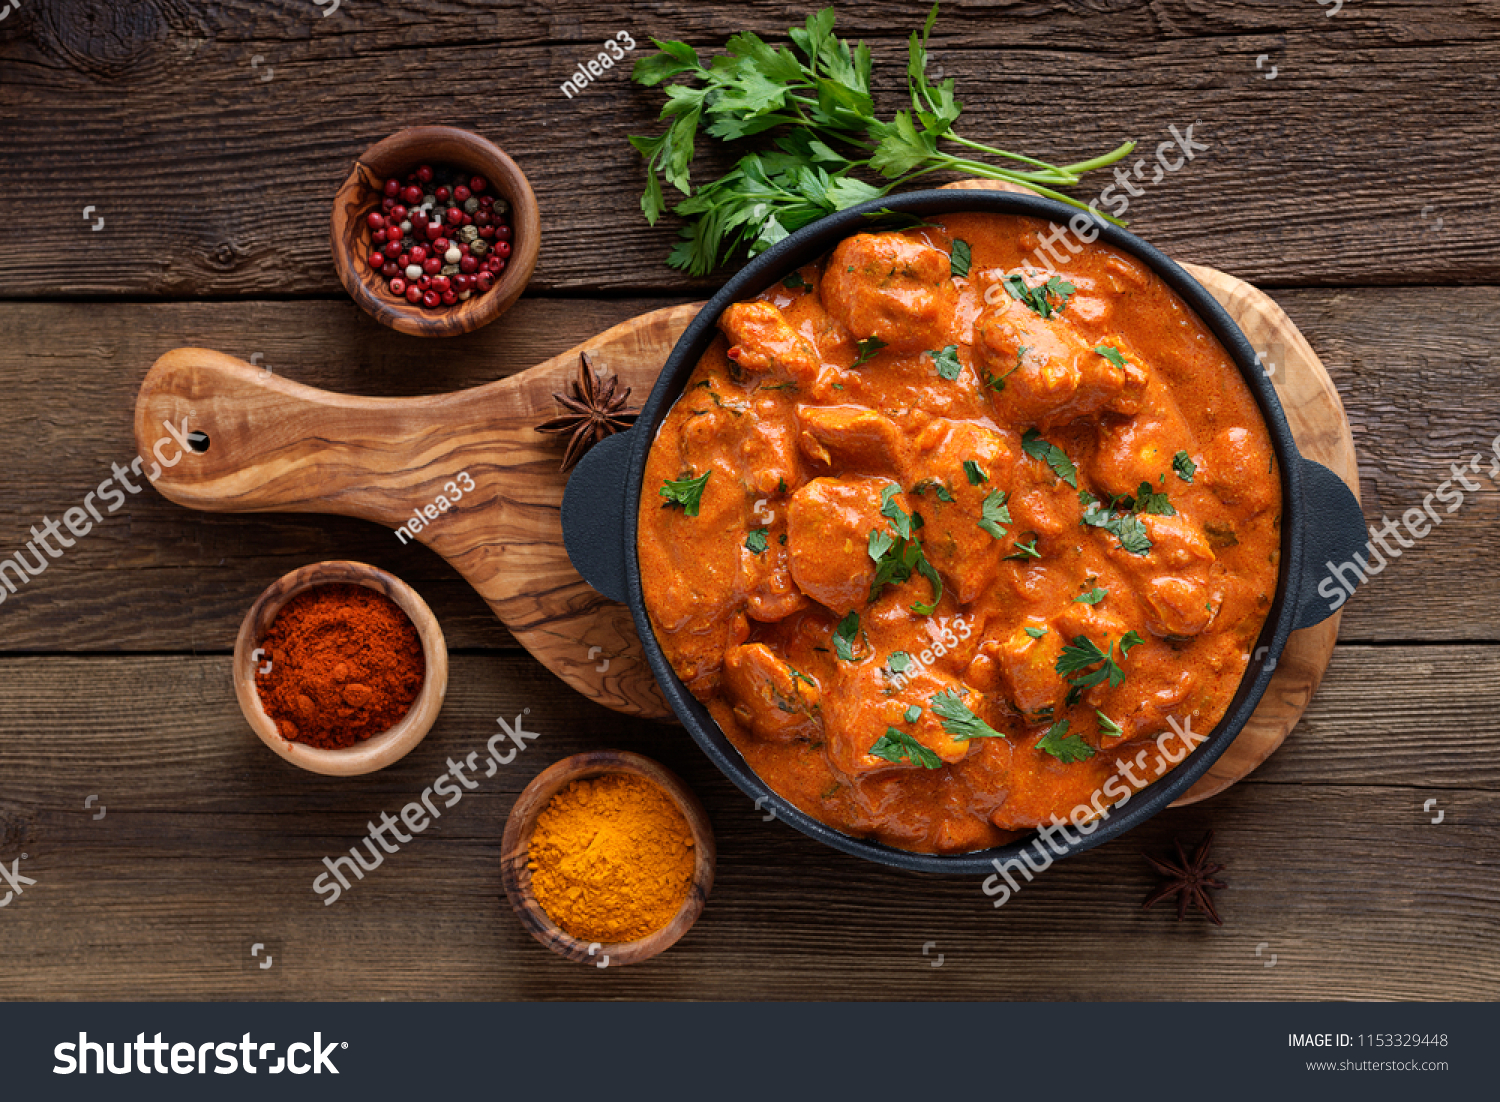 Tasty butter chicken curry dish from Indian cuisine. #1153329448